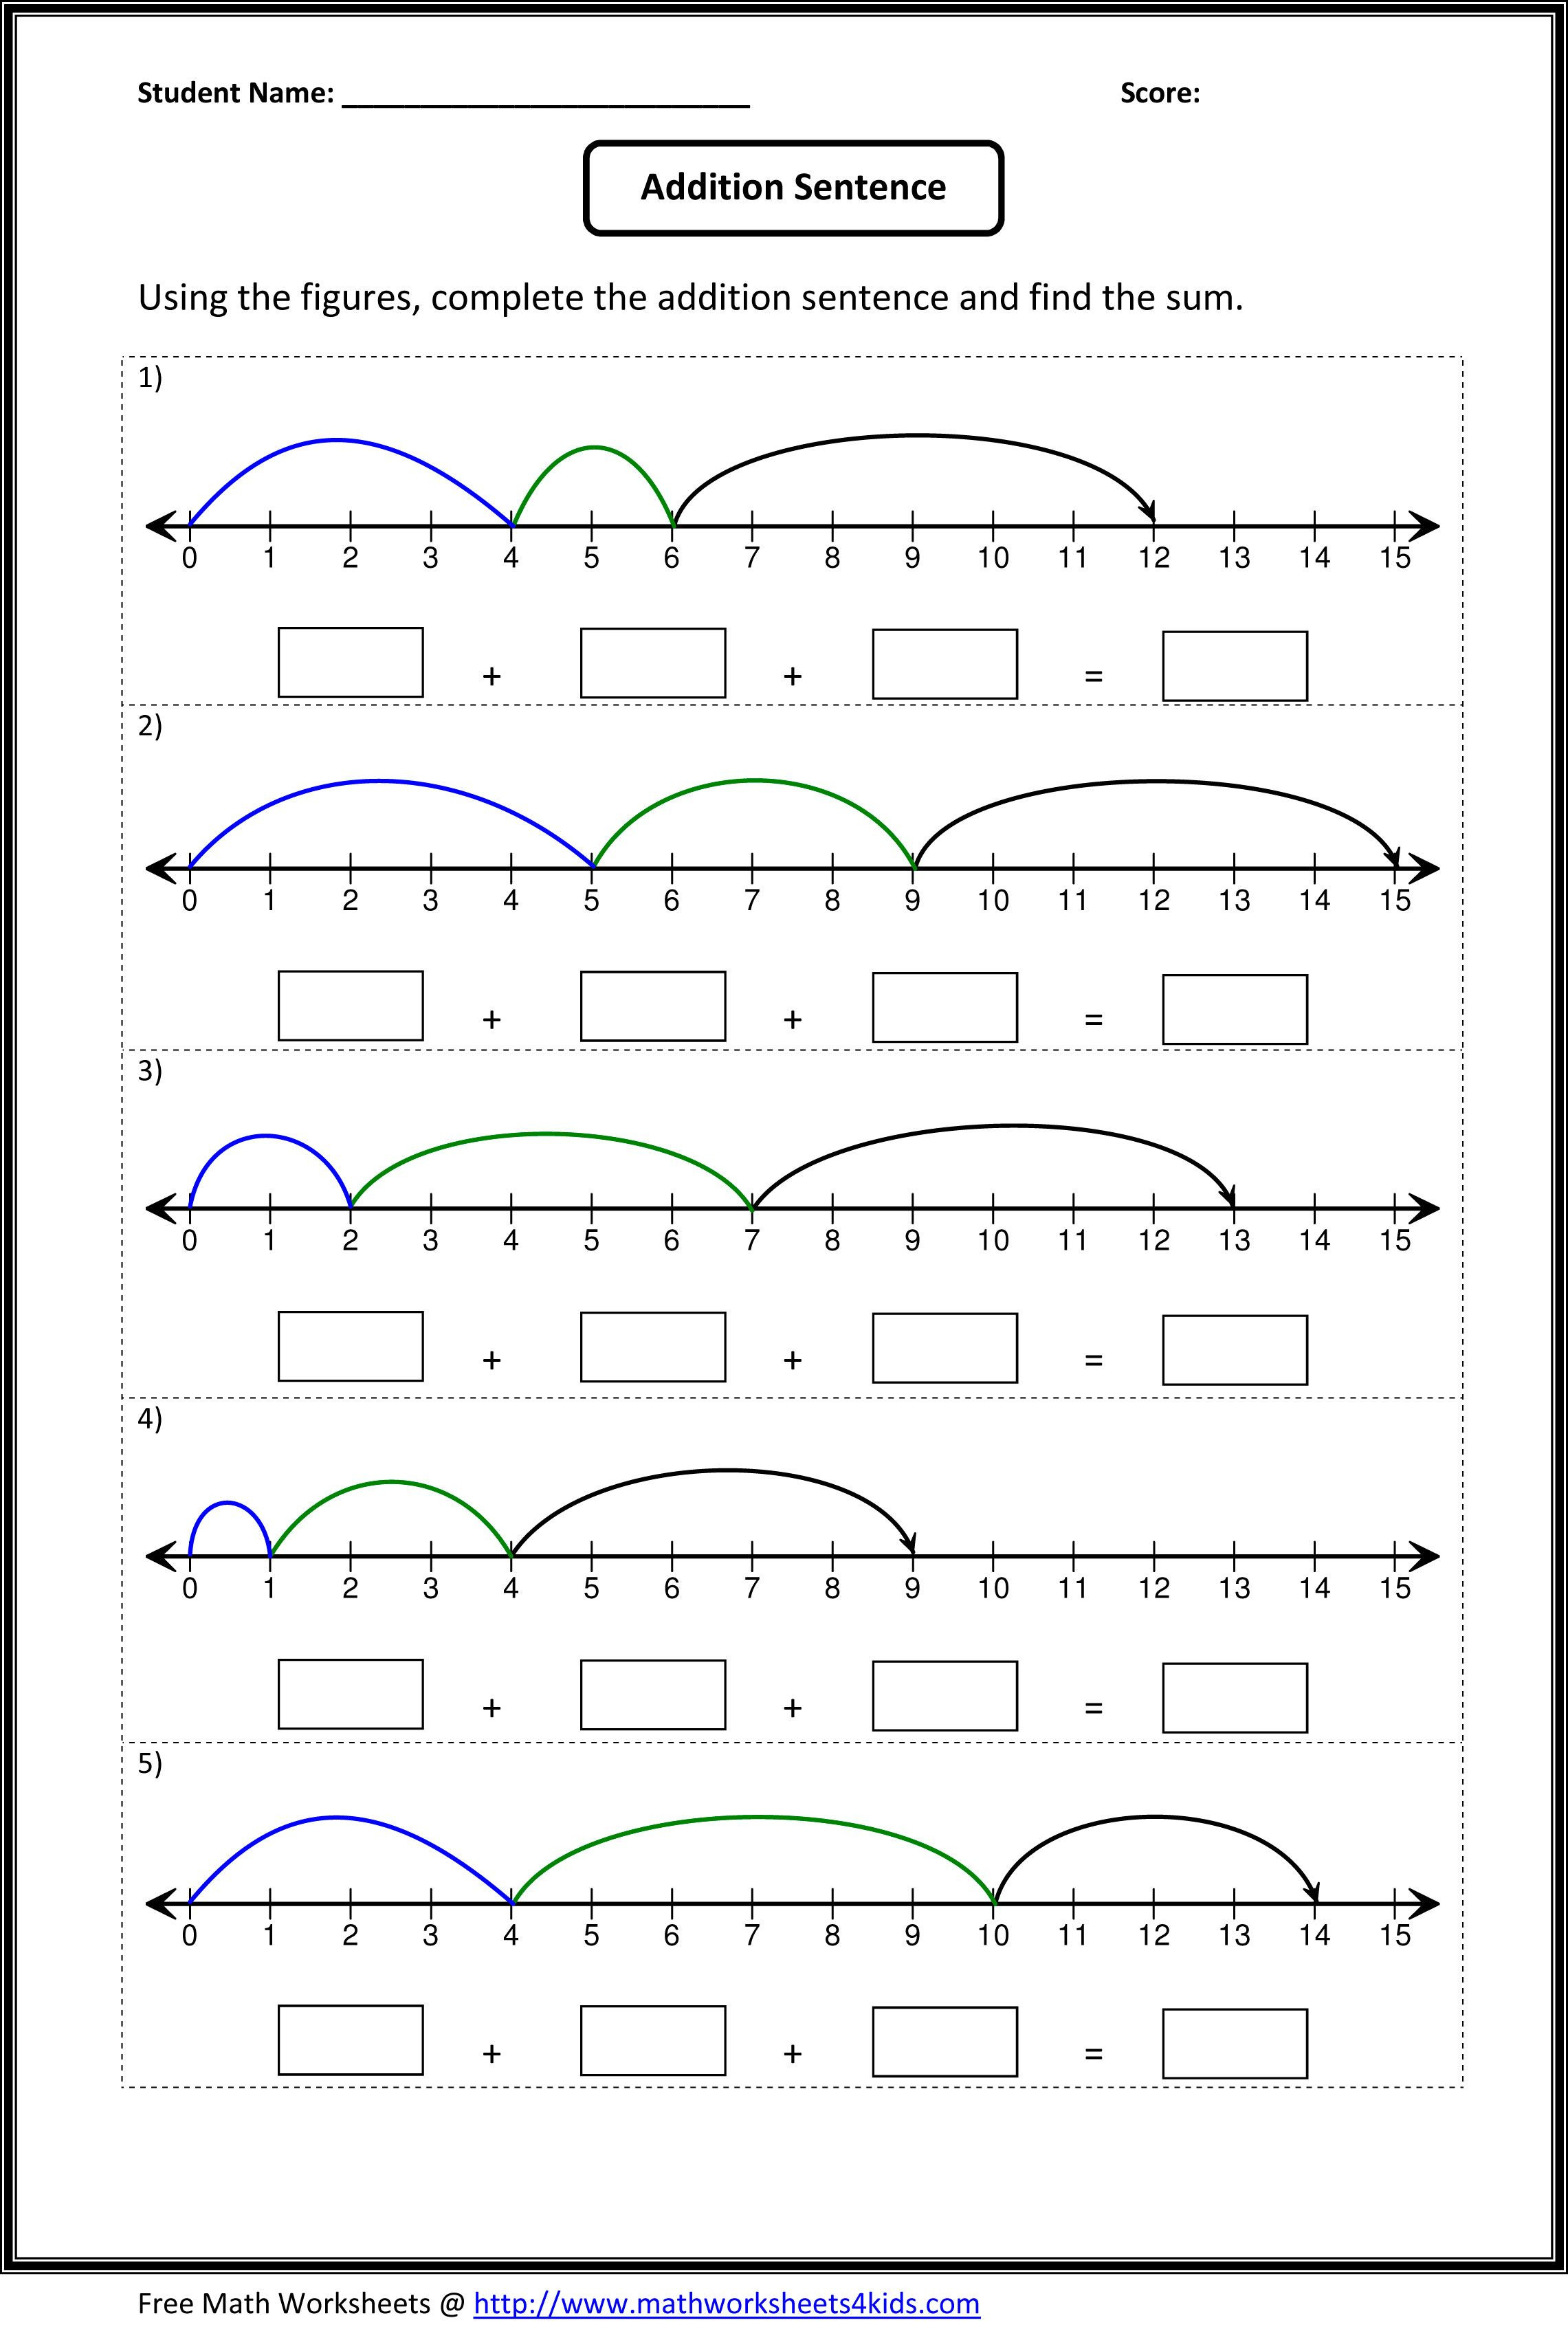 Consumer Math Workbook  Equivalent Fractions On A Number